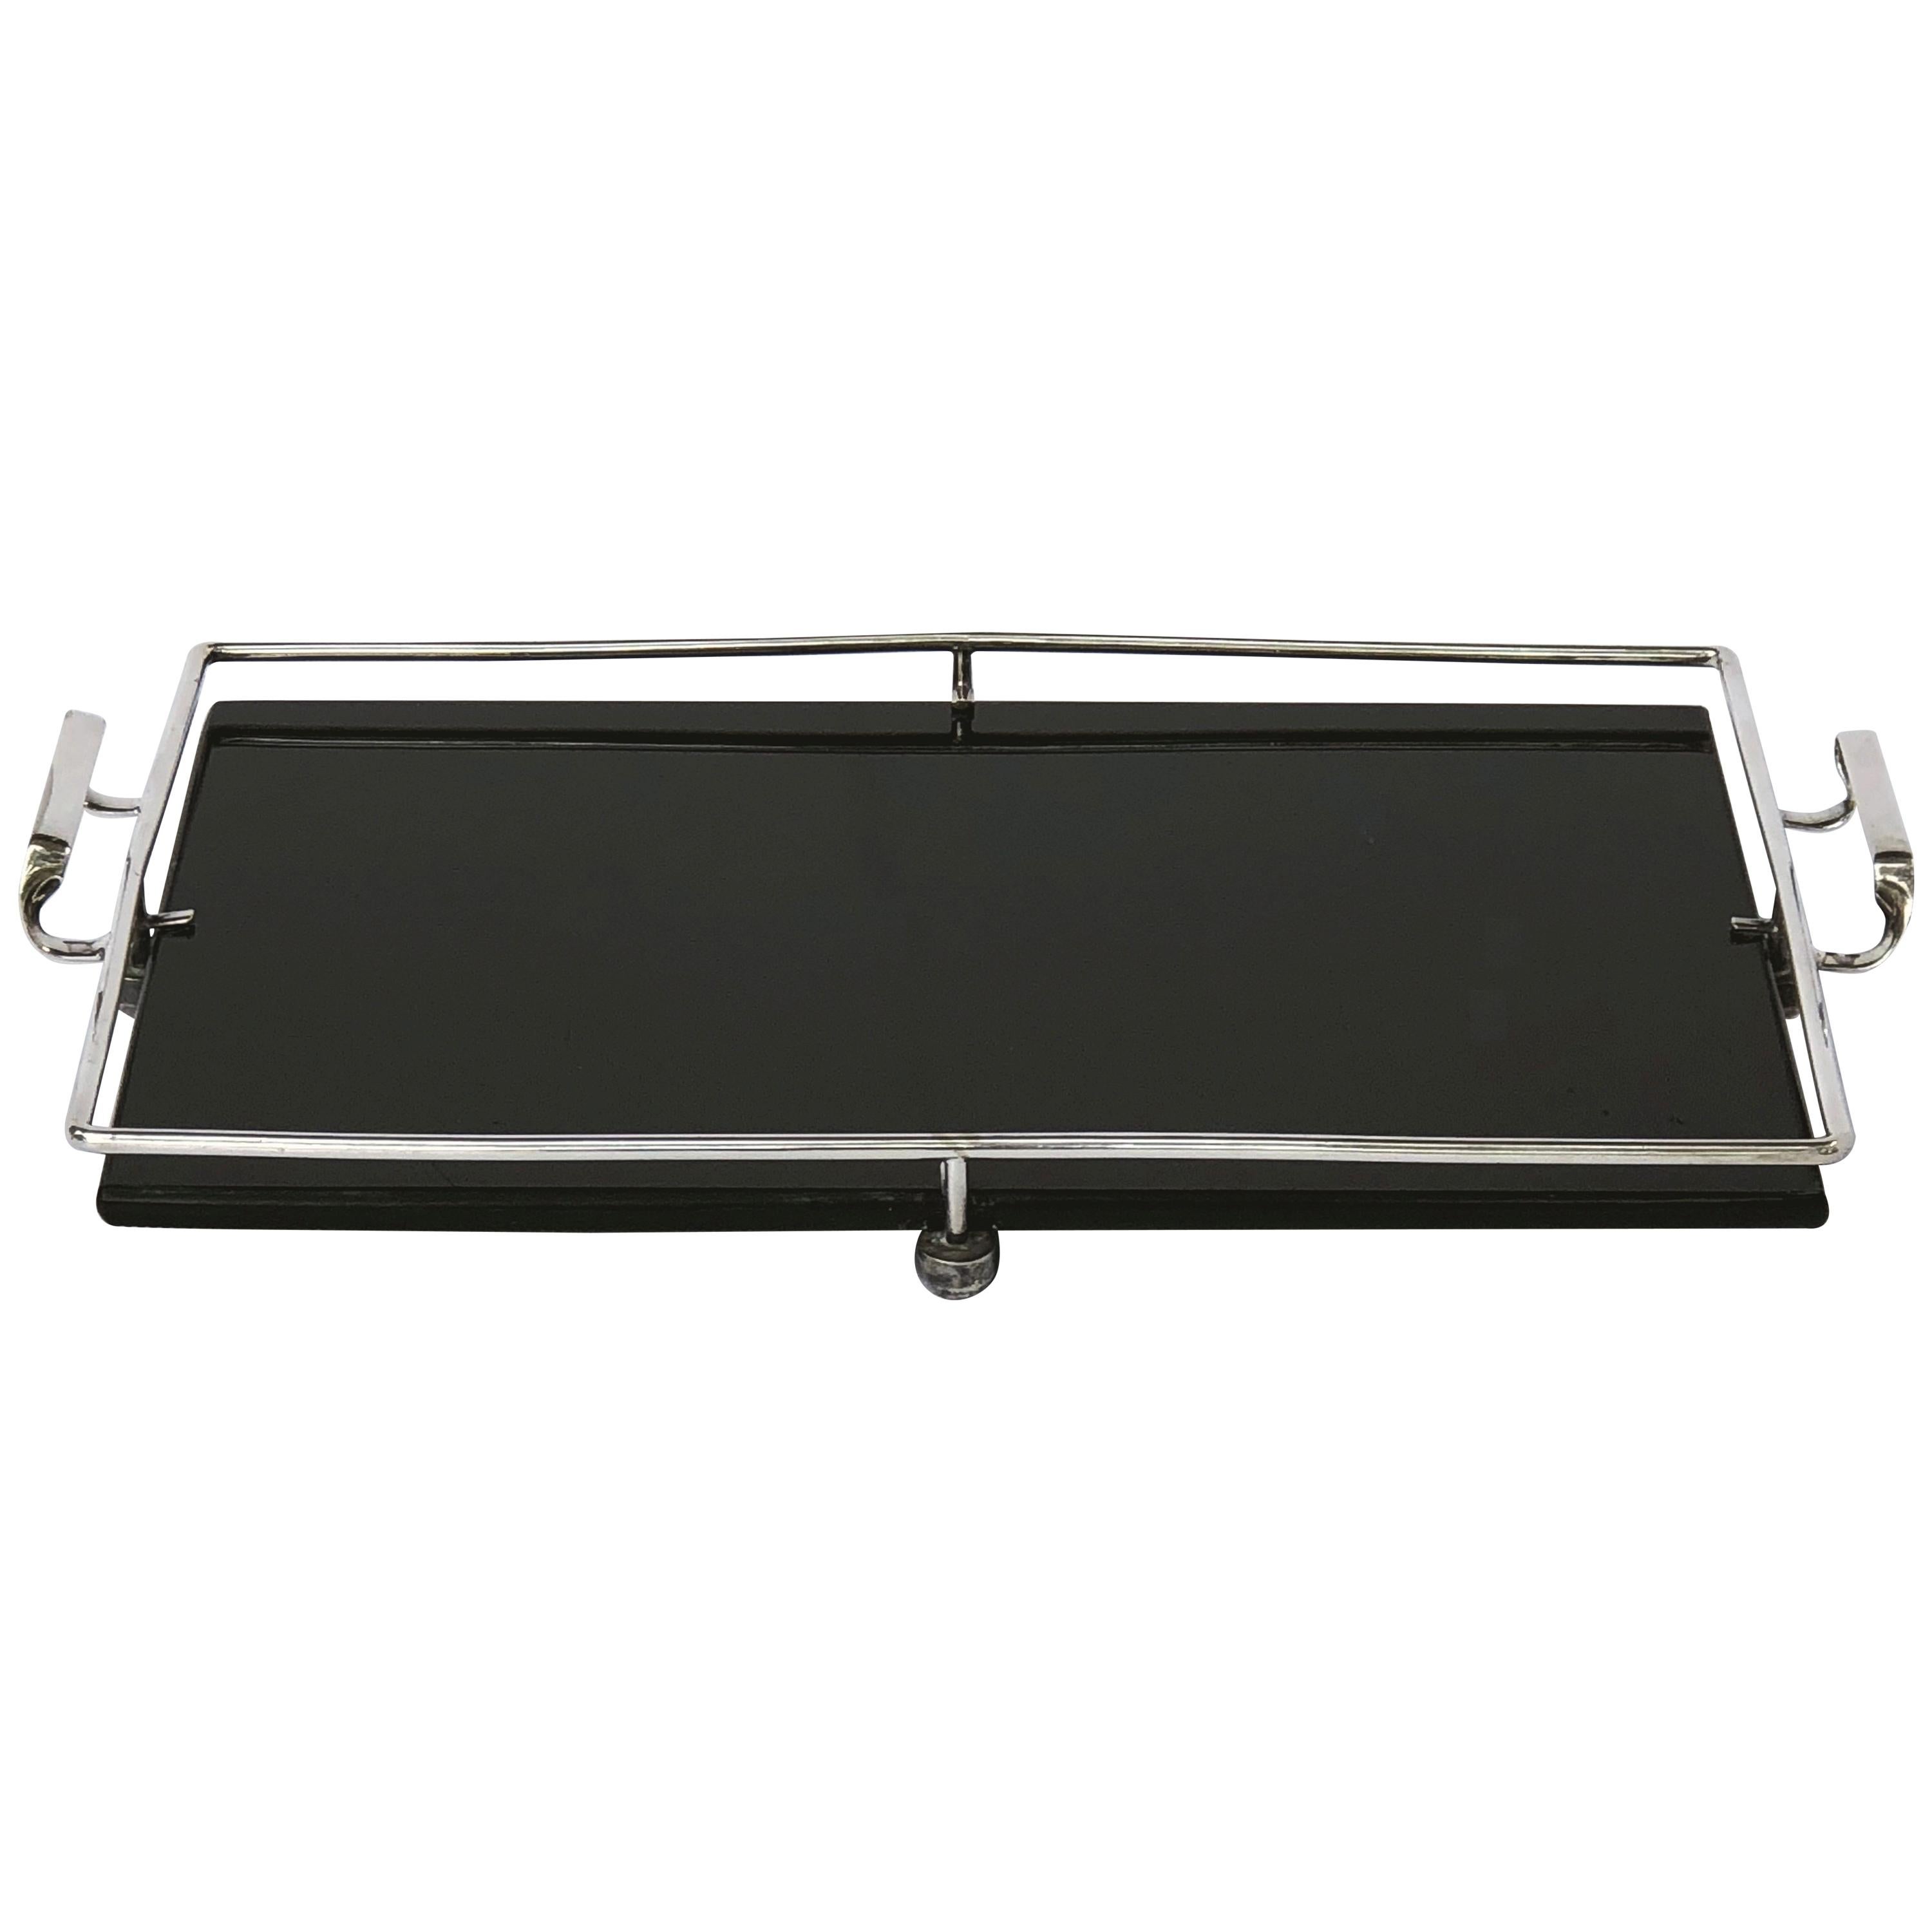 English Serving Tray of Black Glass and Chrome from the Art Deco Period